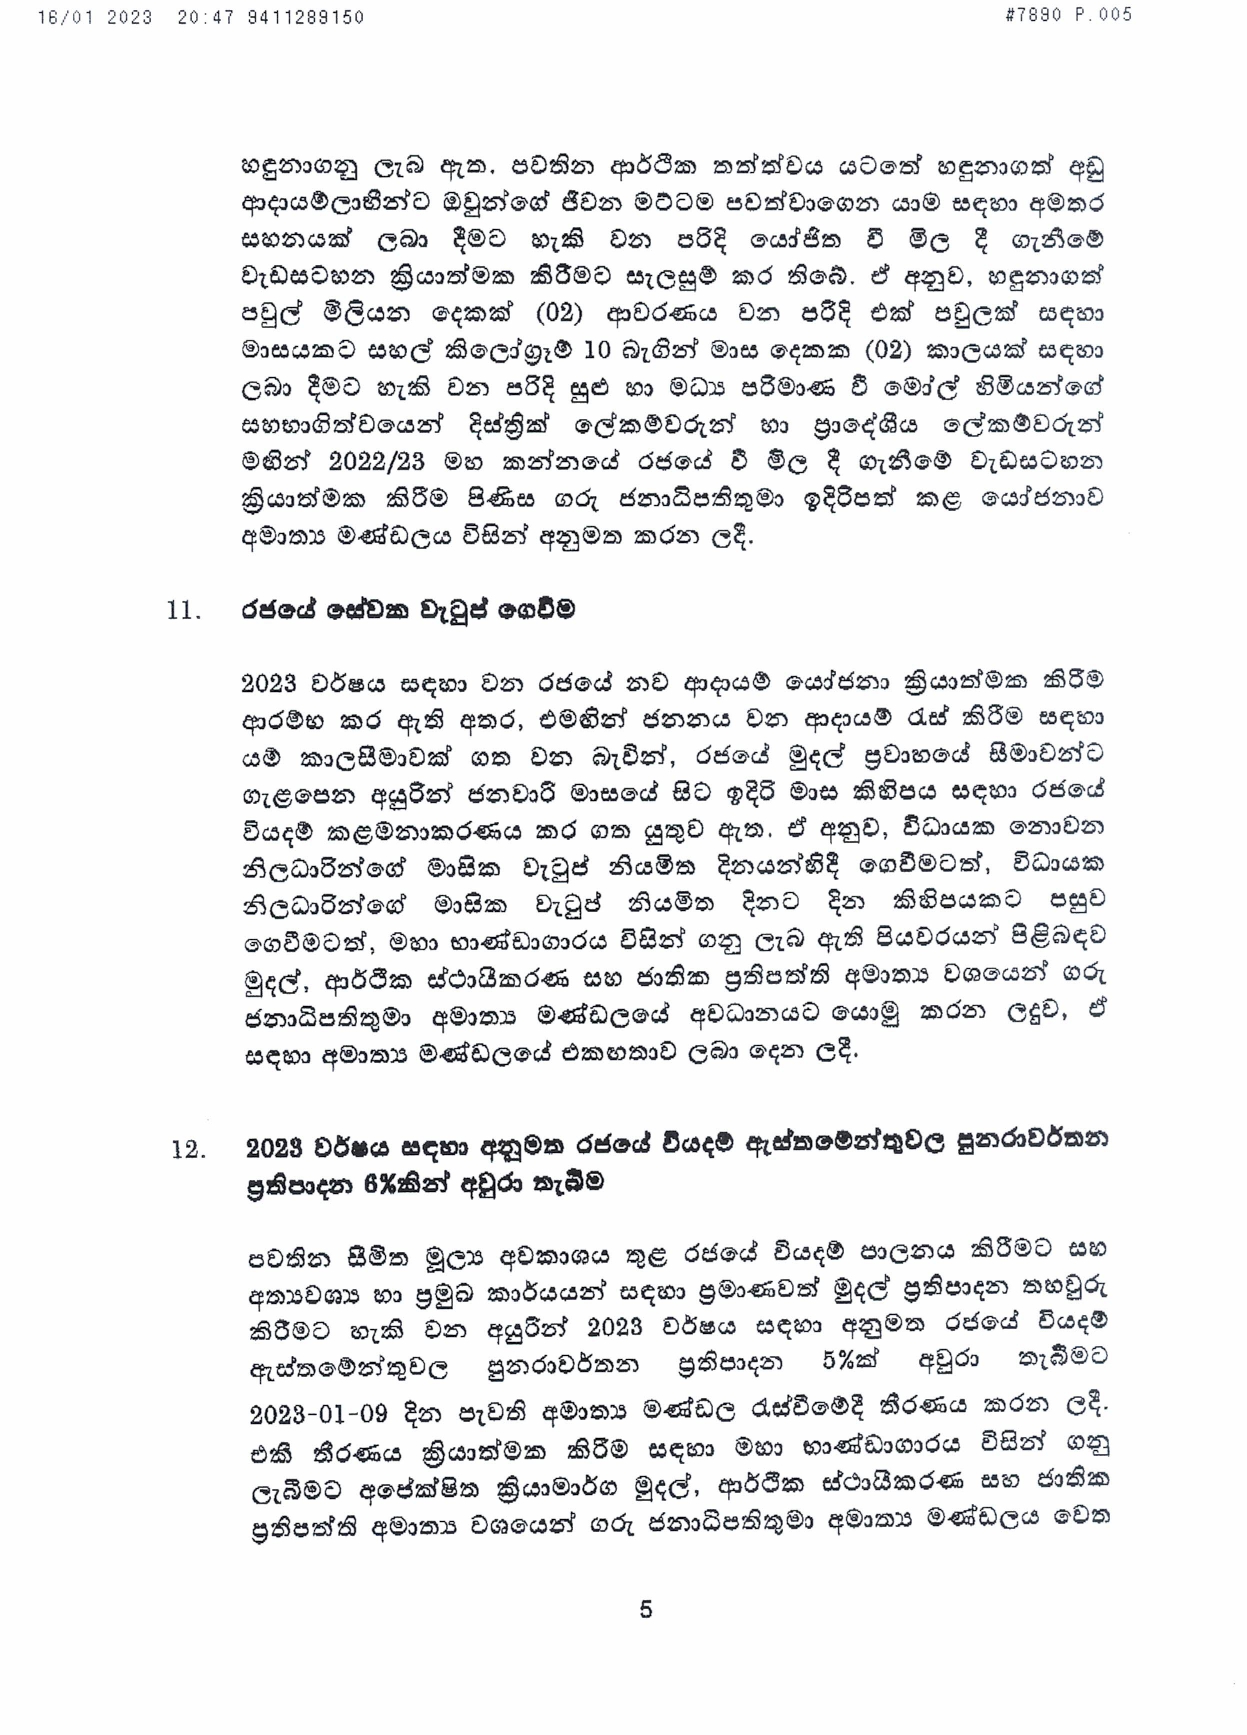 Cabinet Decision on 16.01.2023 page 0005